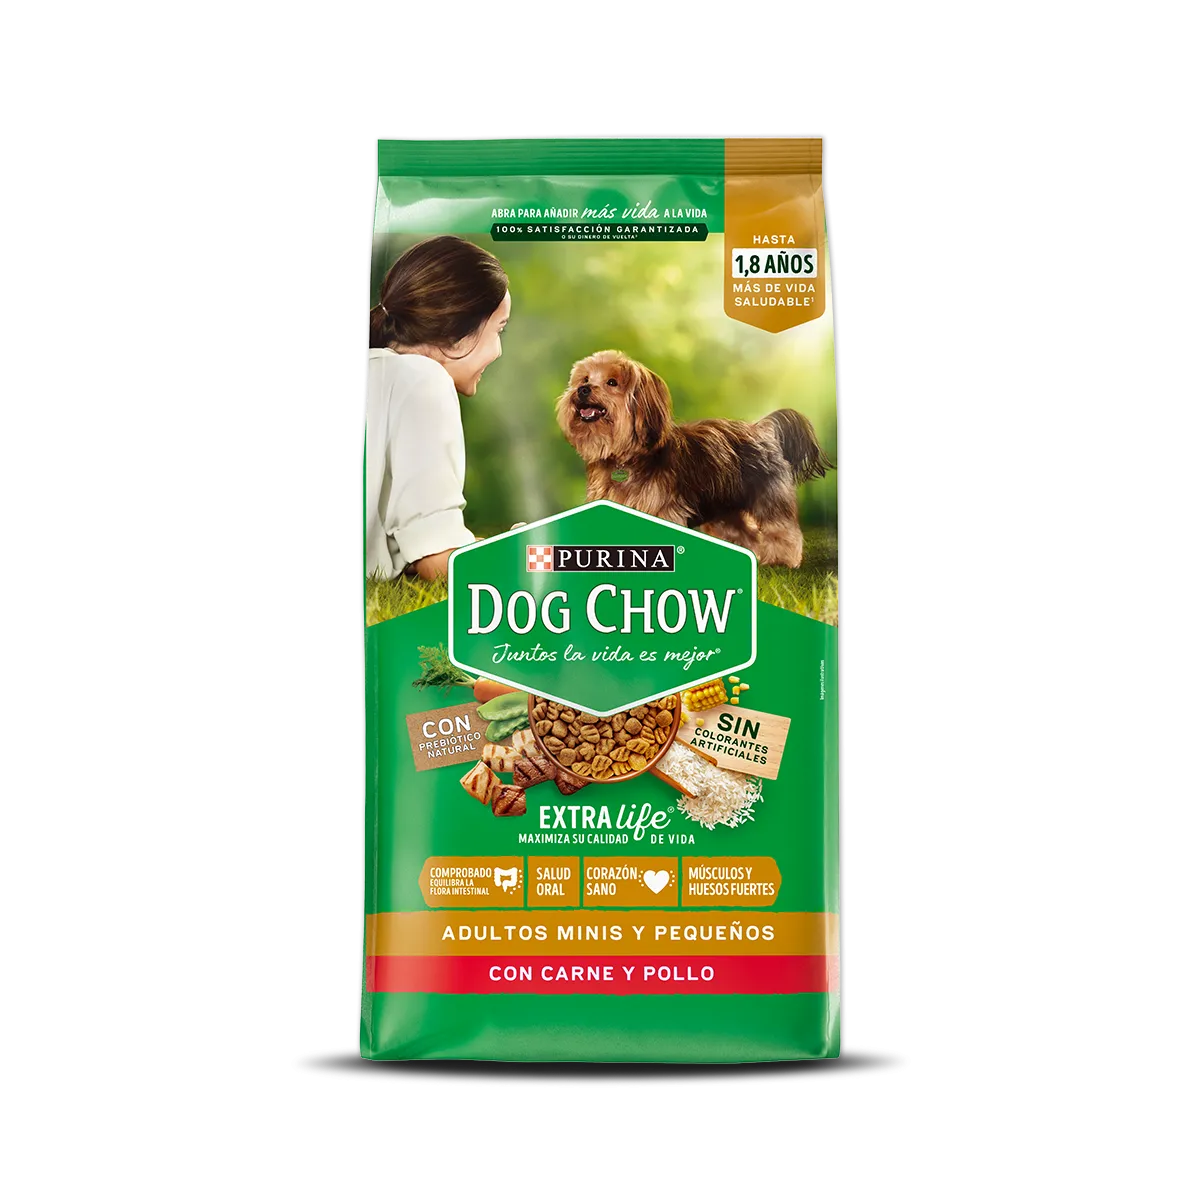 Purina-DogChow-adultos-minis-colombia.png.webp